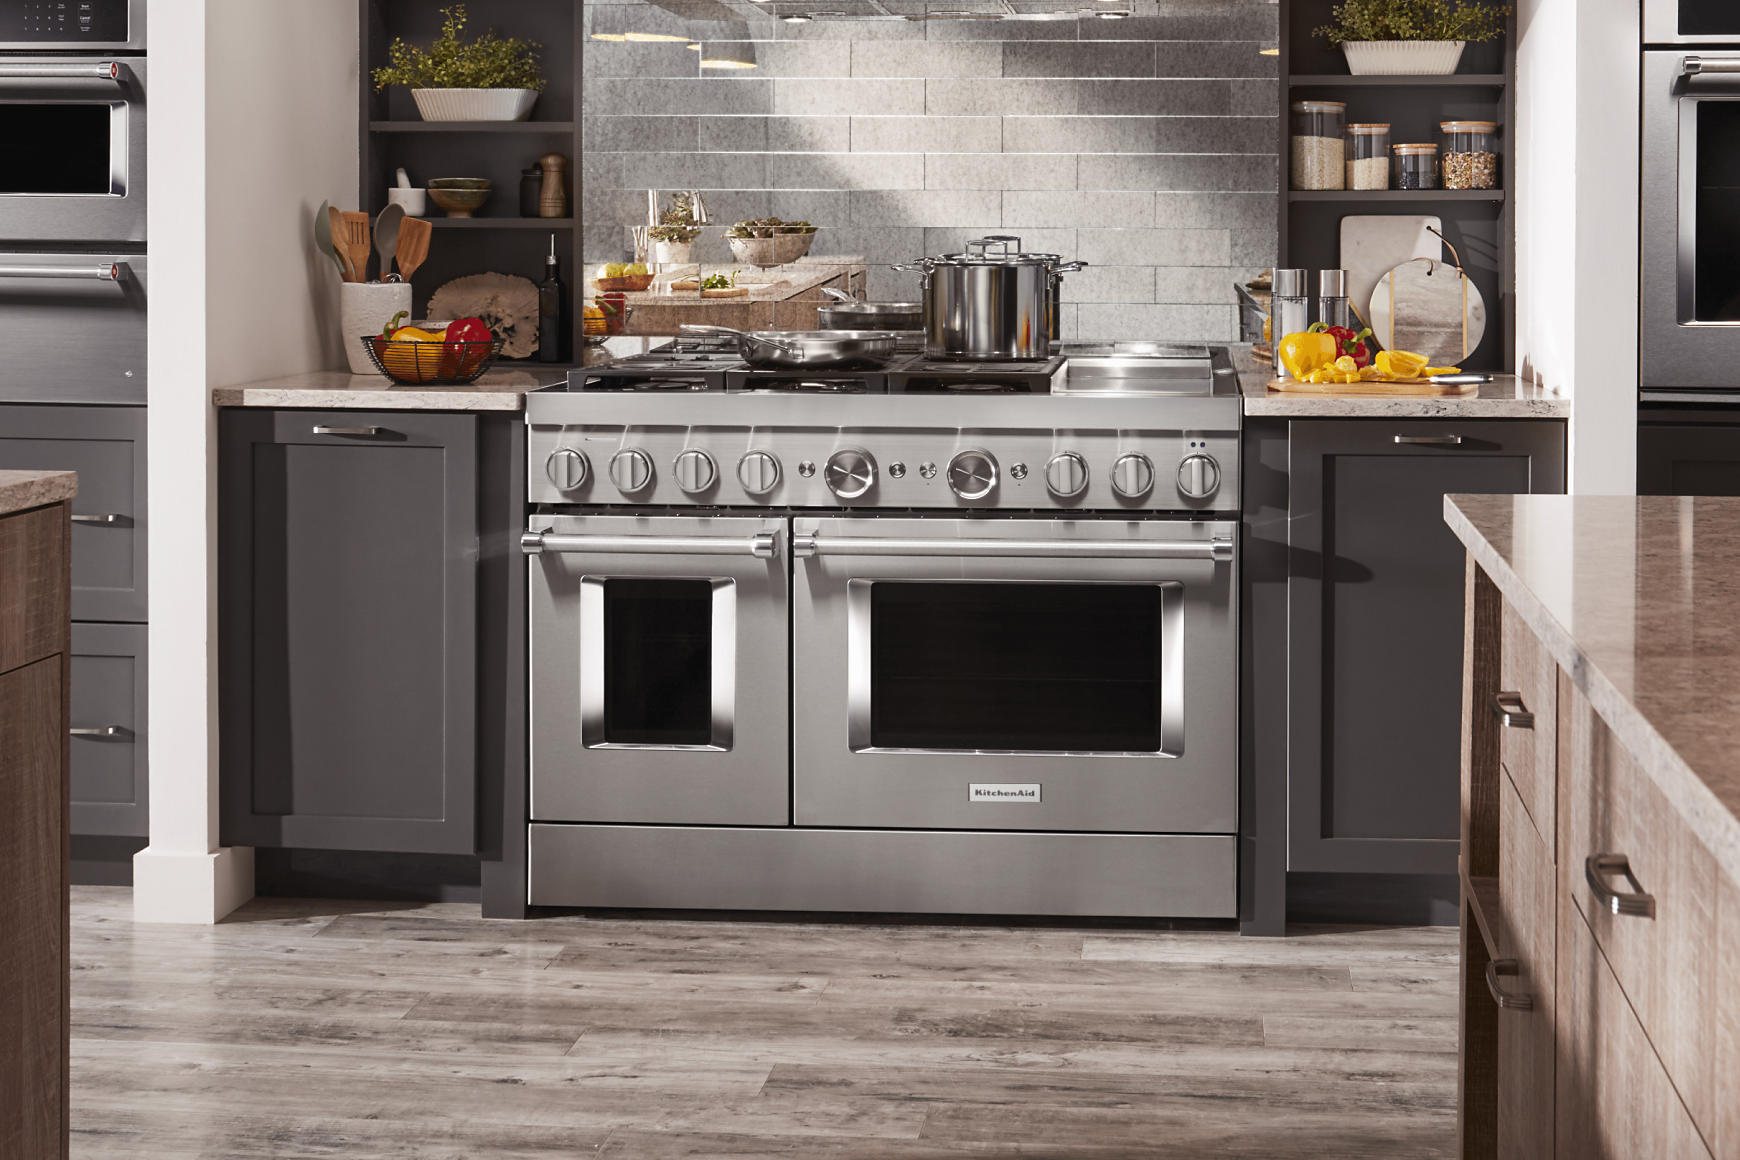 Stainless steel, double-oven commercial-style range in a kitchen